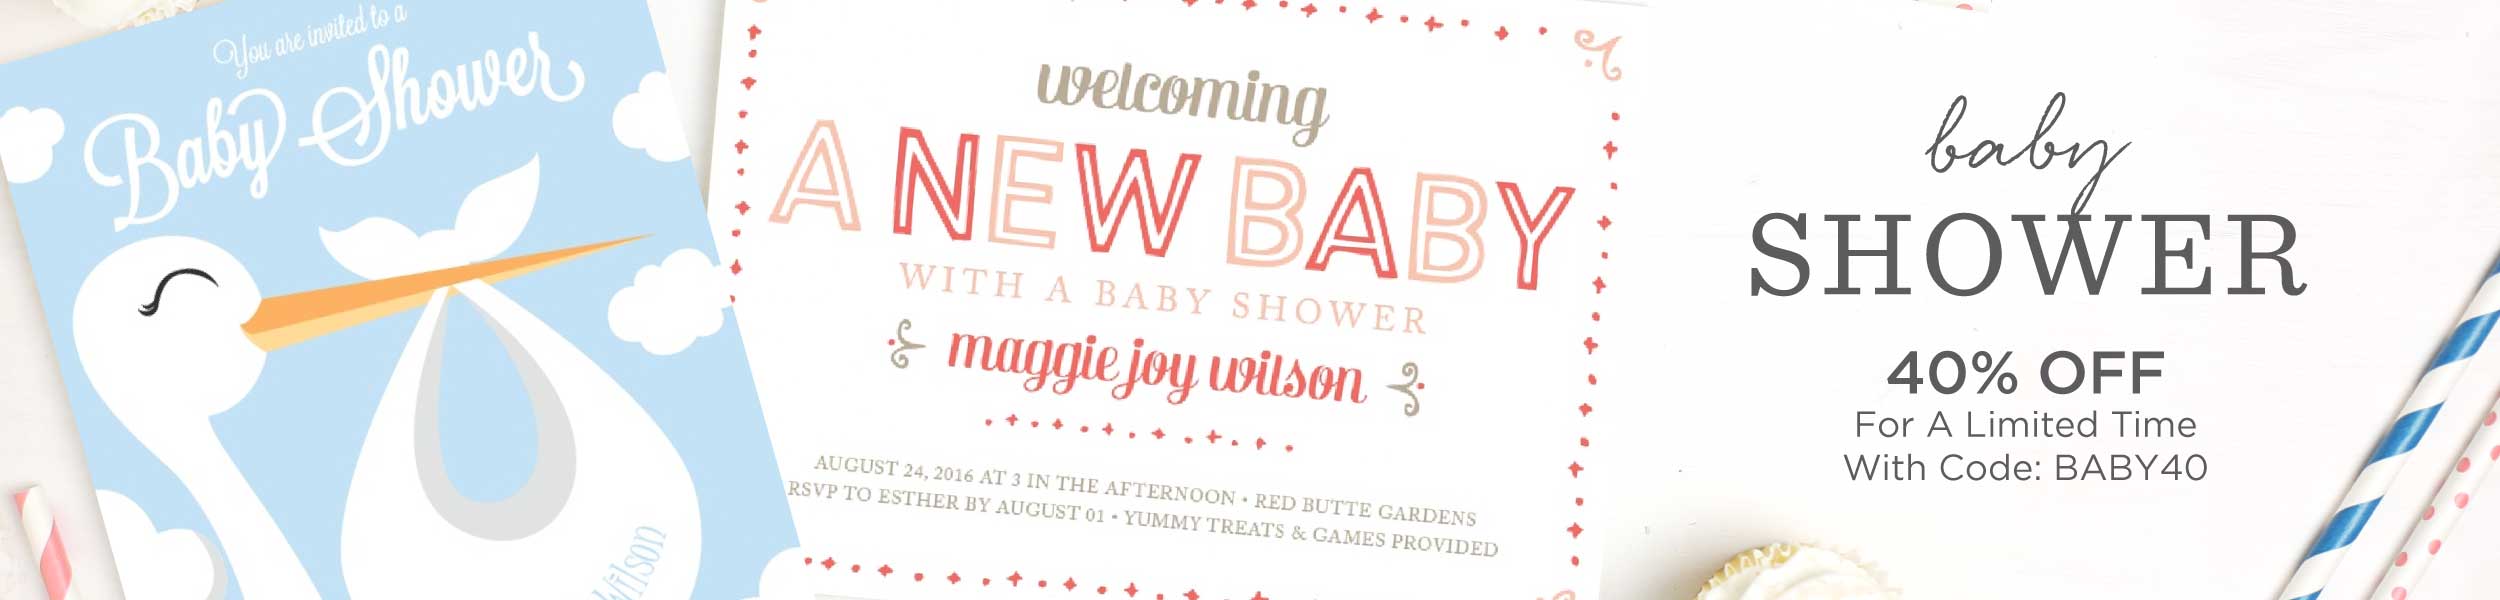 Full Size of Baby Shower:63+ Delightful Cheap Baby Shower Invitations Image Inspirations Cheap Baby Shower Invitations Or Baby Shower Poems With Baby Shower Bingo Plus Save The Date Baby Shower Together With Arreglos Para Baby Shower As Well As Baby Shower Party Themes And Baby Shower Wreath